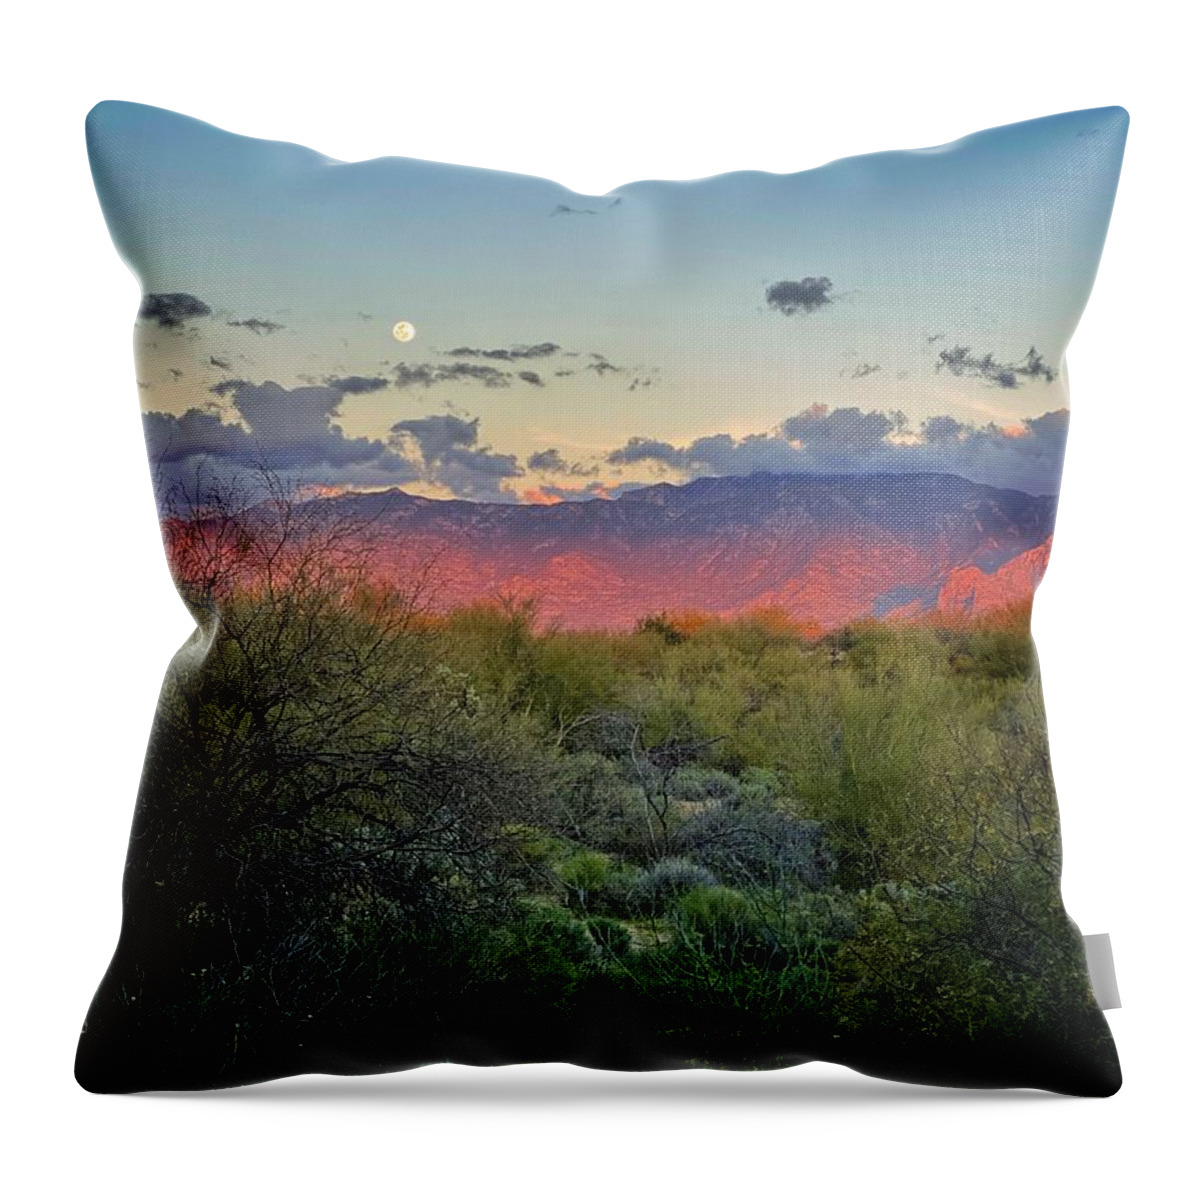 Sunset Throw Pillow featuring the photograph Catalina Mountains Sunset by Jerry Abbott